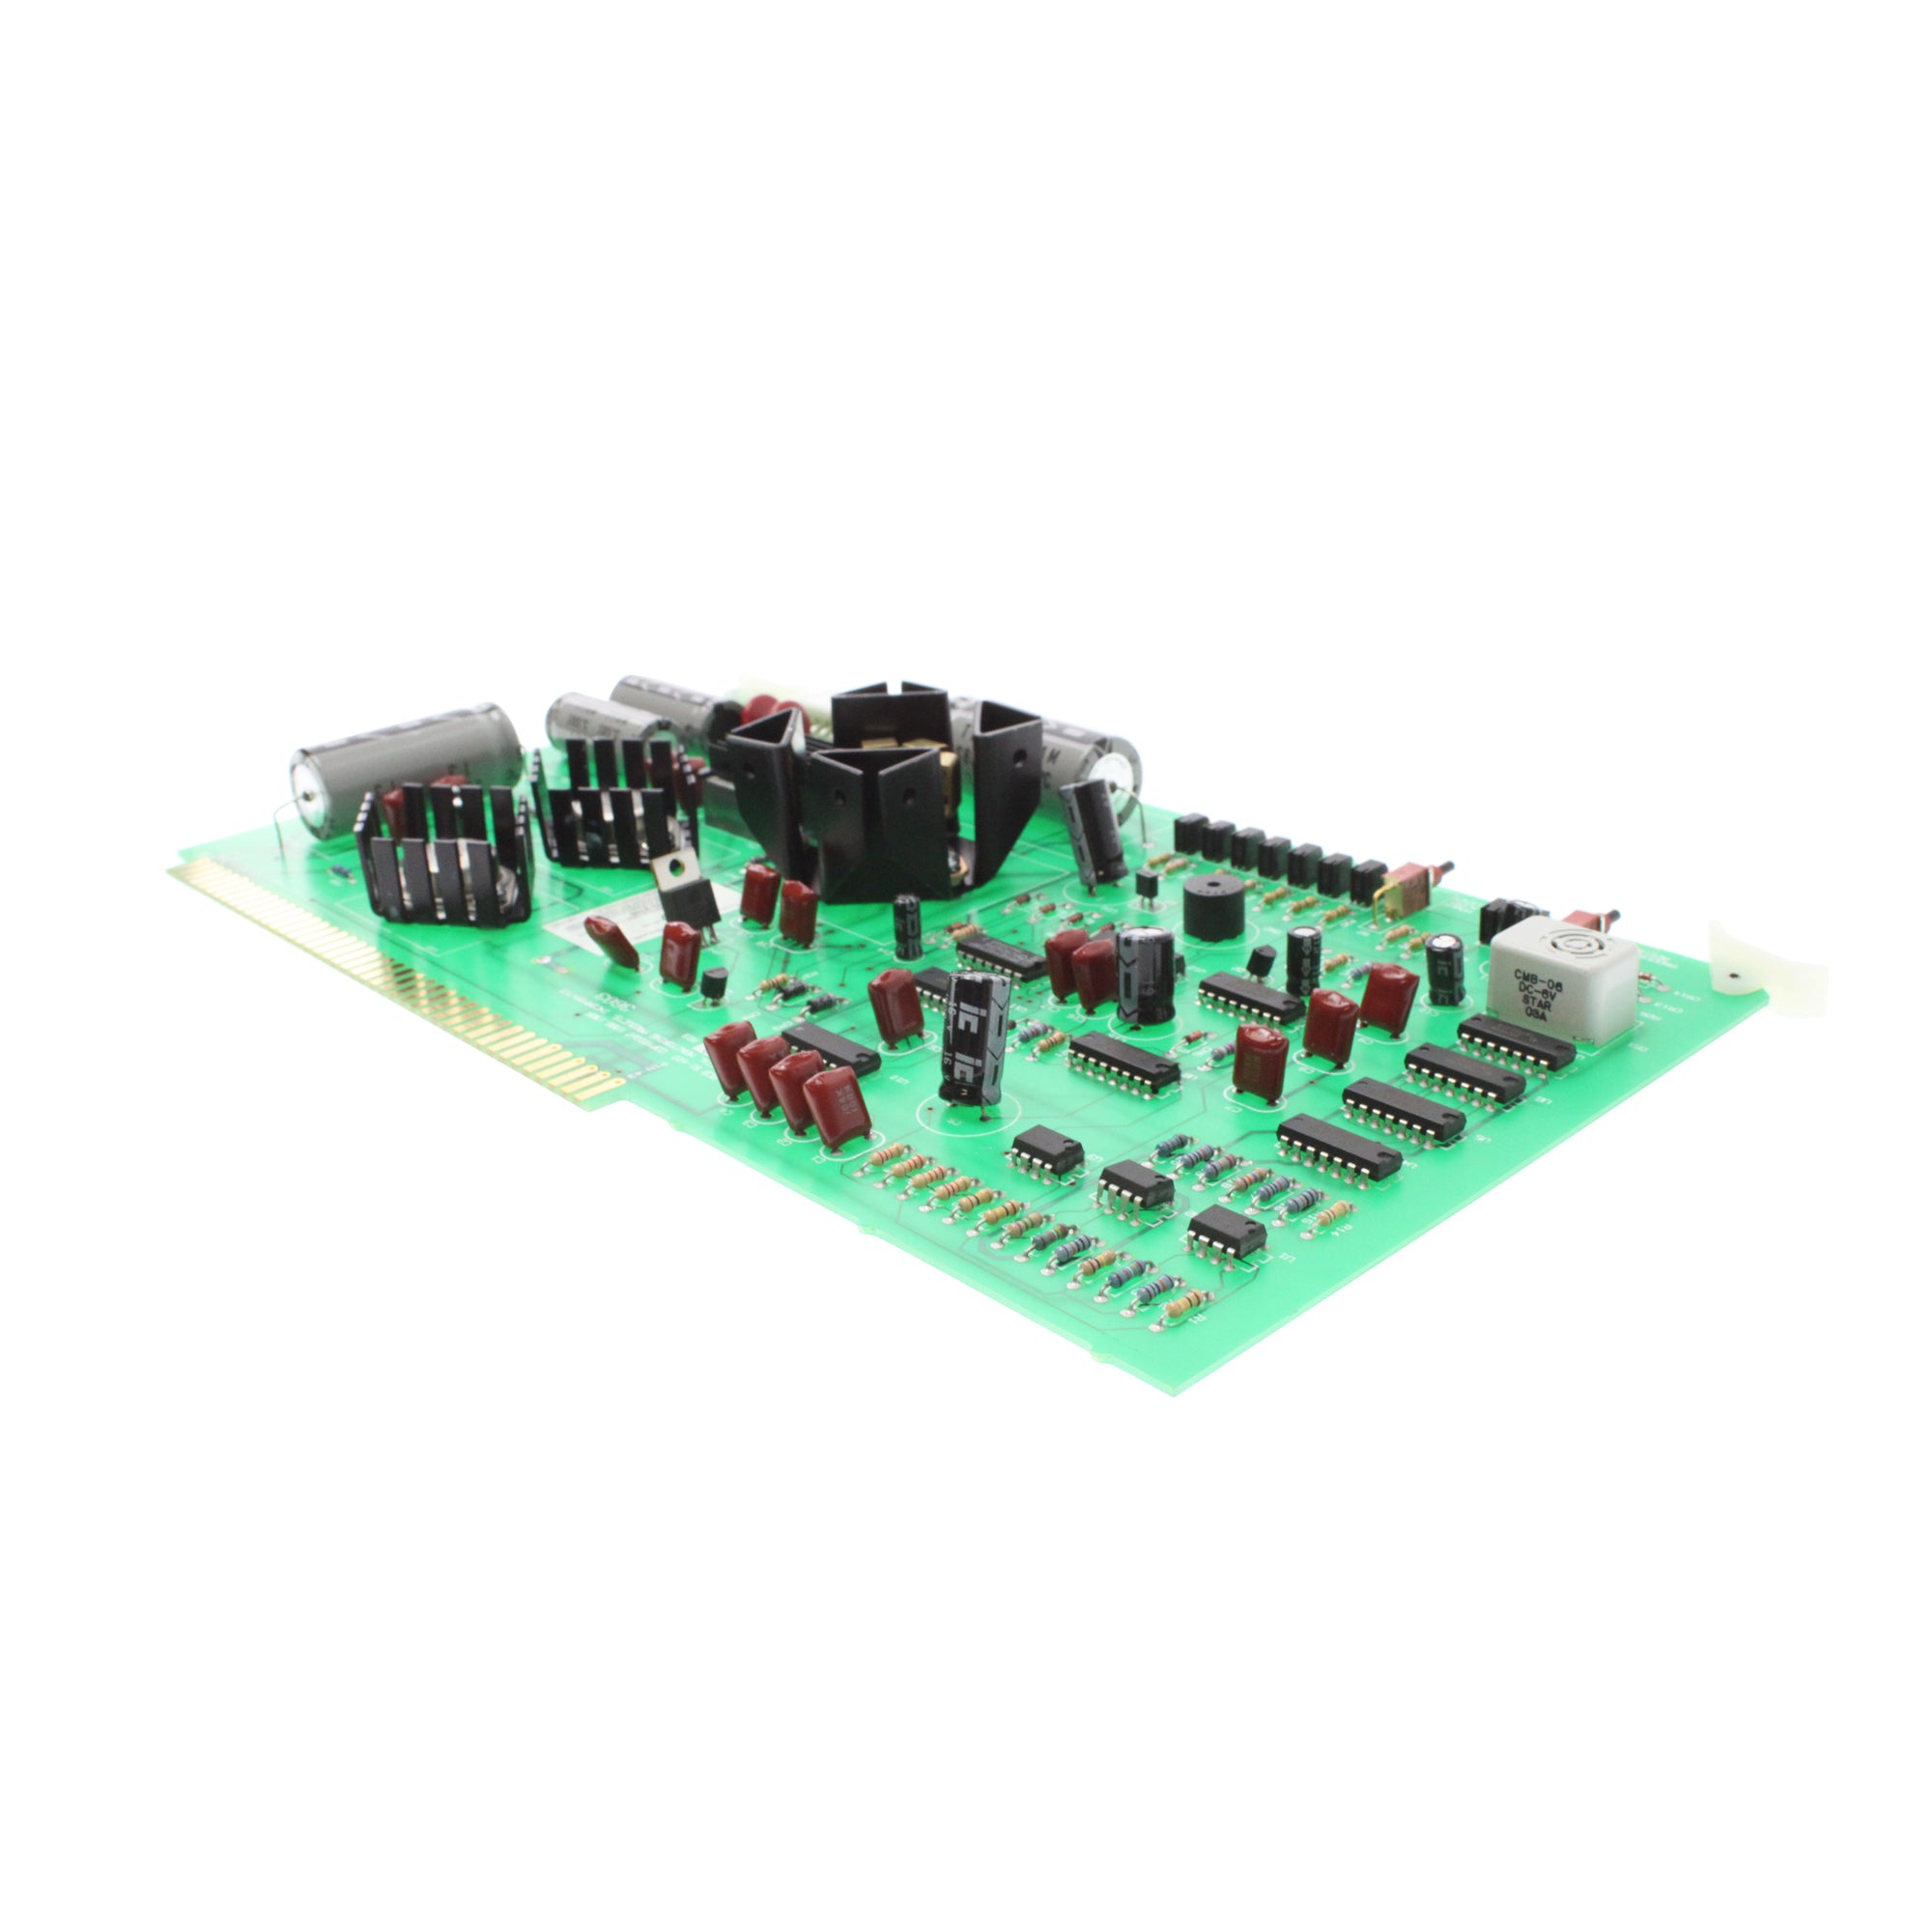 Digital Monitoring Products, DIGITAL MONITORING PRODUCTS SCS-120 MULTIBUS POWER SUPPLY CARD FOR THE SCS-1062